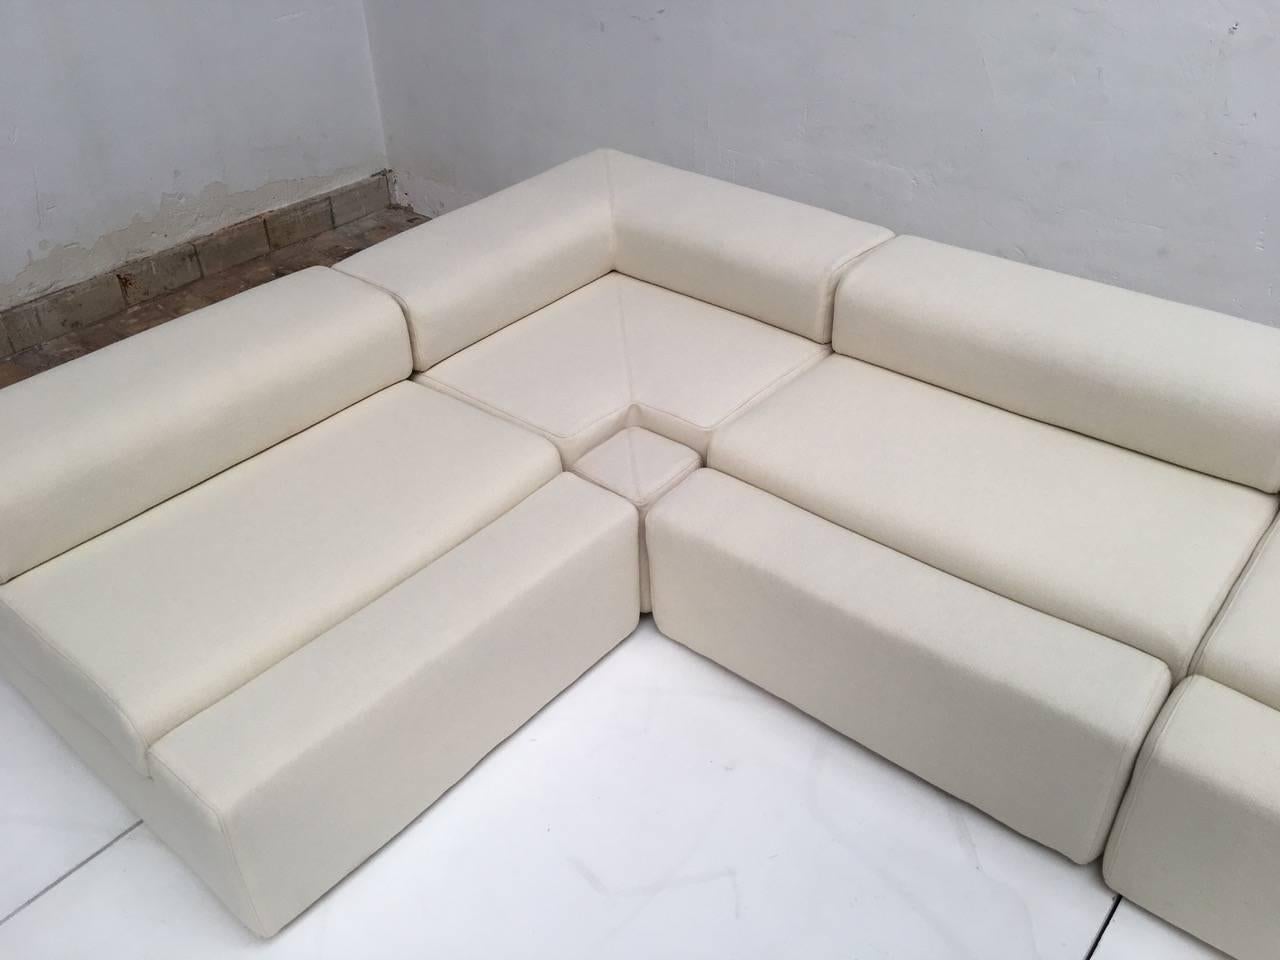 Steel Unique modular Sofa by Mangiarotti from the 'Casa Vitale', 1969 with certificate